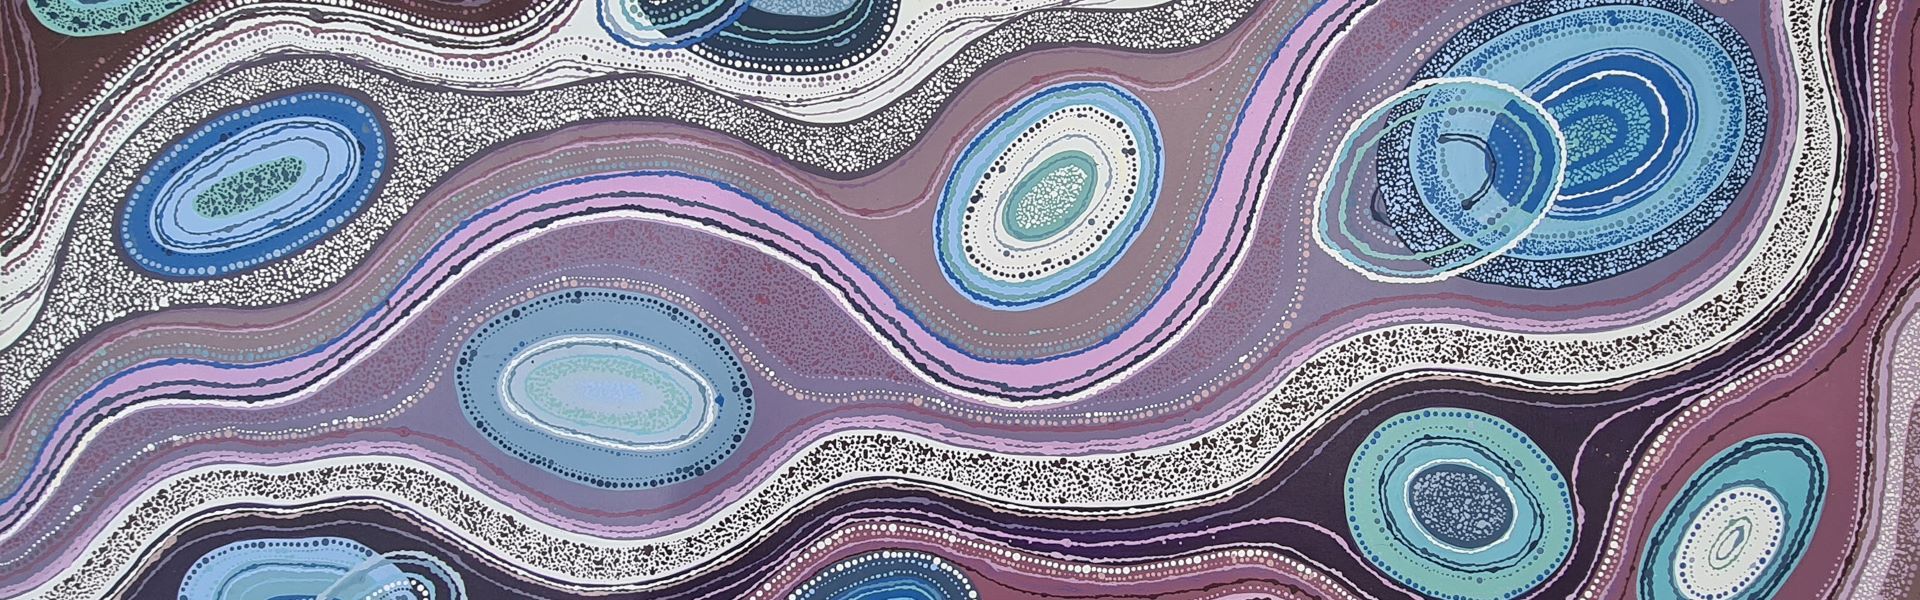 Abstract Indigenous Art by Michelle Williams, Utilising purples, blues and whites